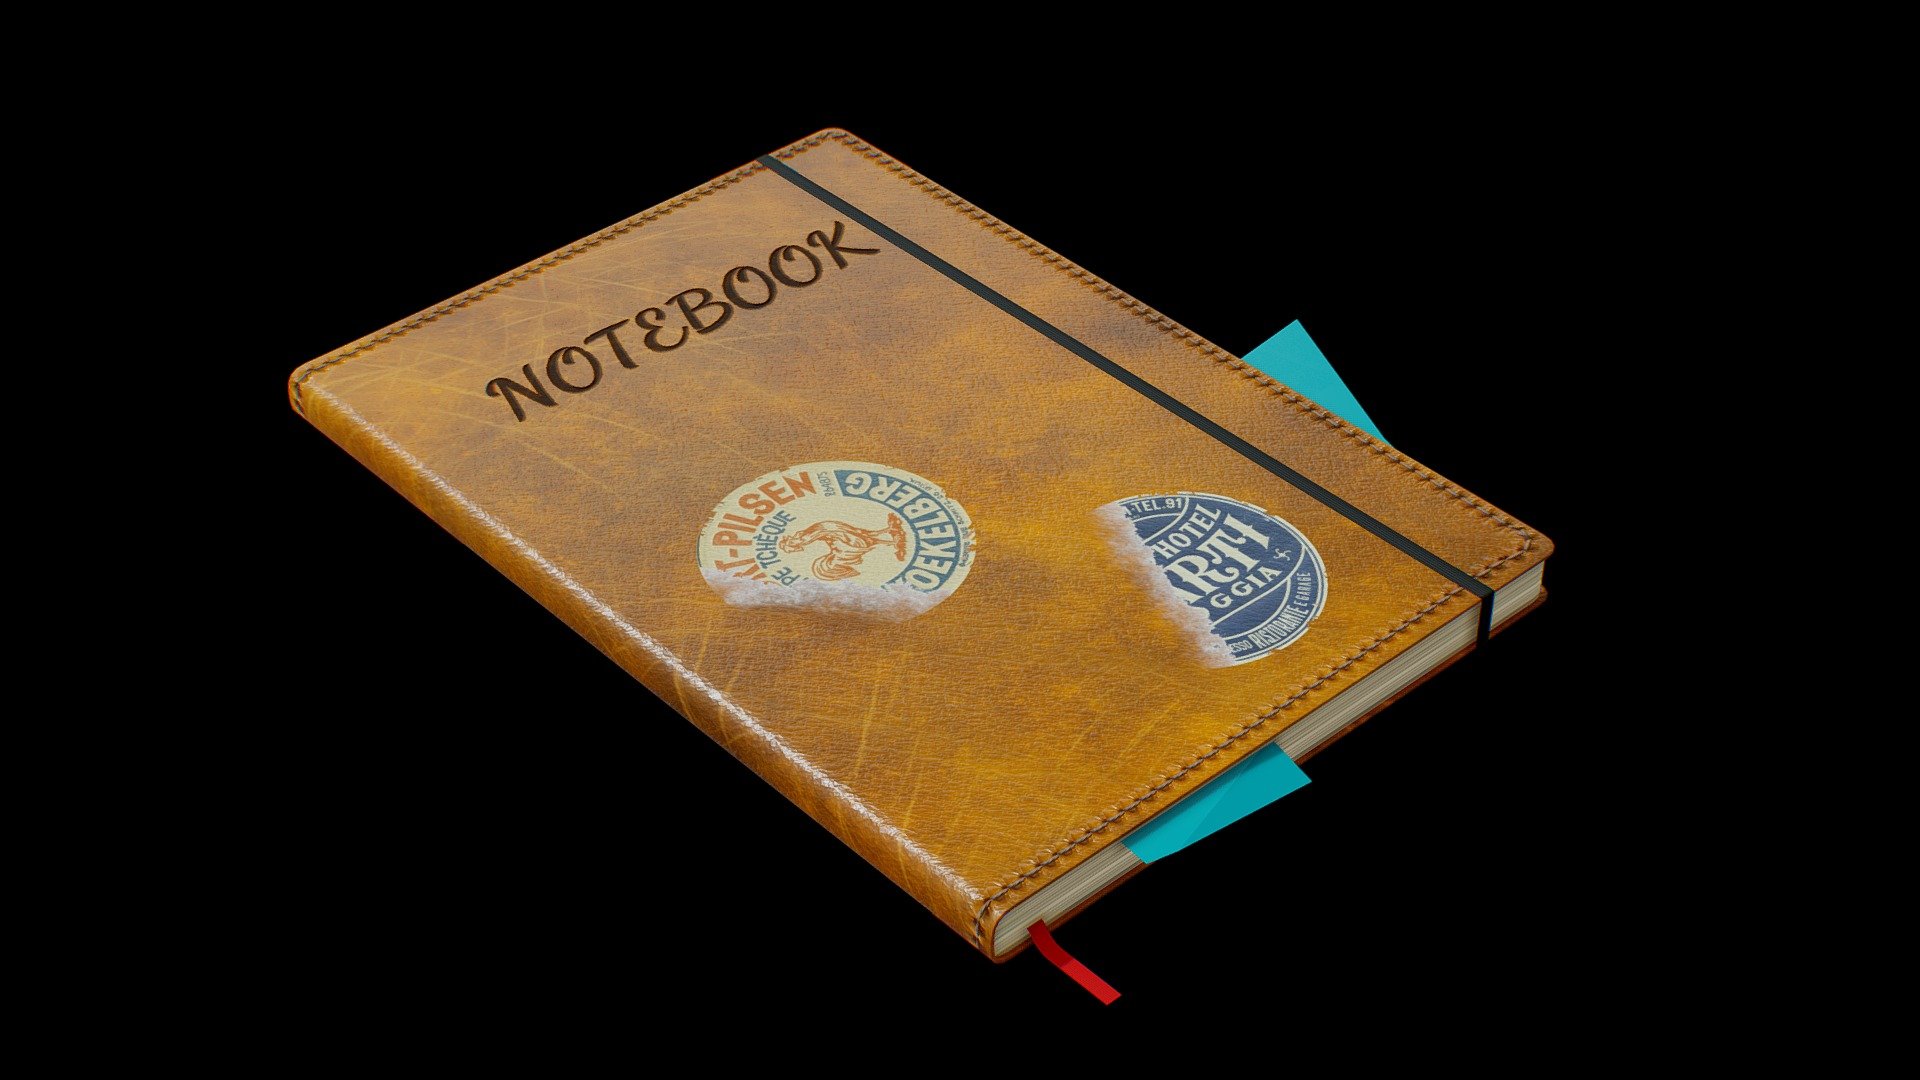 Free download：www.freepoly.org - NoteBook-Freepoly.org - Download Free 3D model by Freepoly.org (@blackrray) 3d model